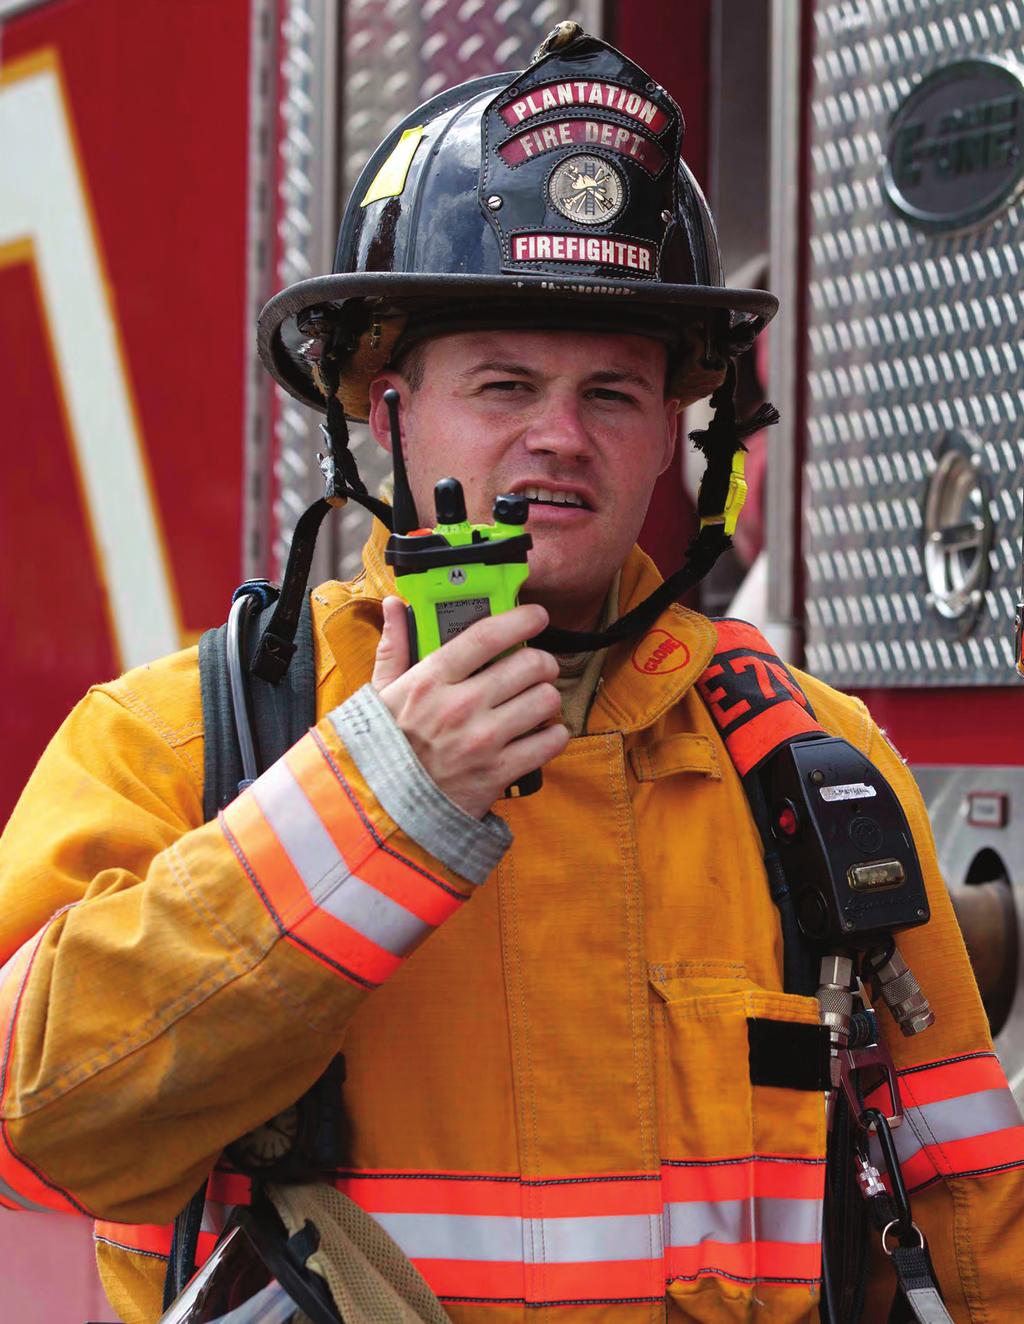 THE MOST COMPLETE LINEUP OF TWO-WAY RADIOS DESIGNED TO KEEP YOU SAFE Agencies expect their investment to deliver maximum